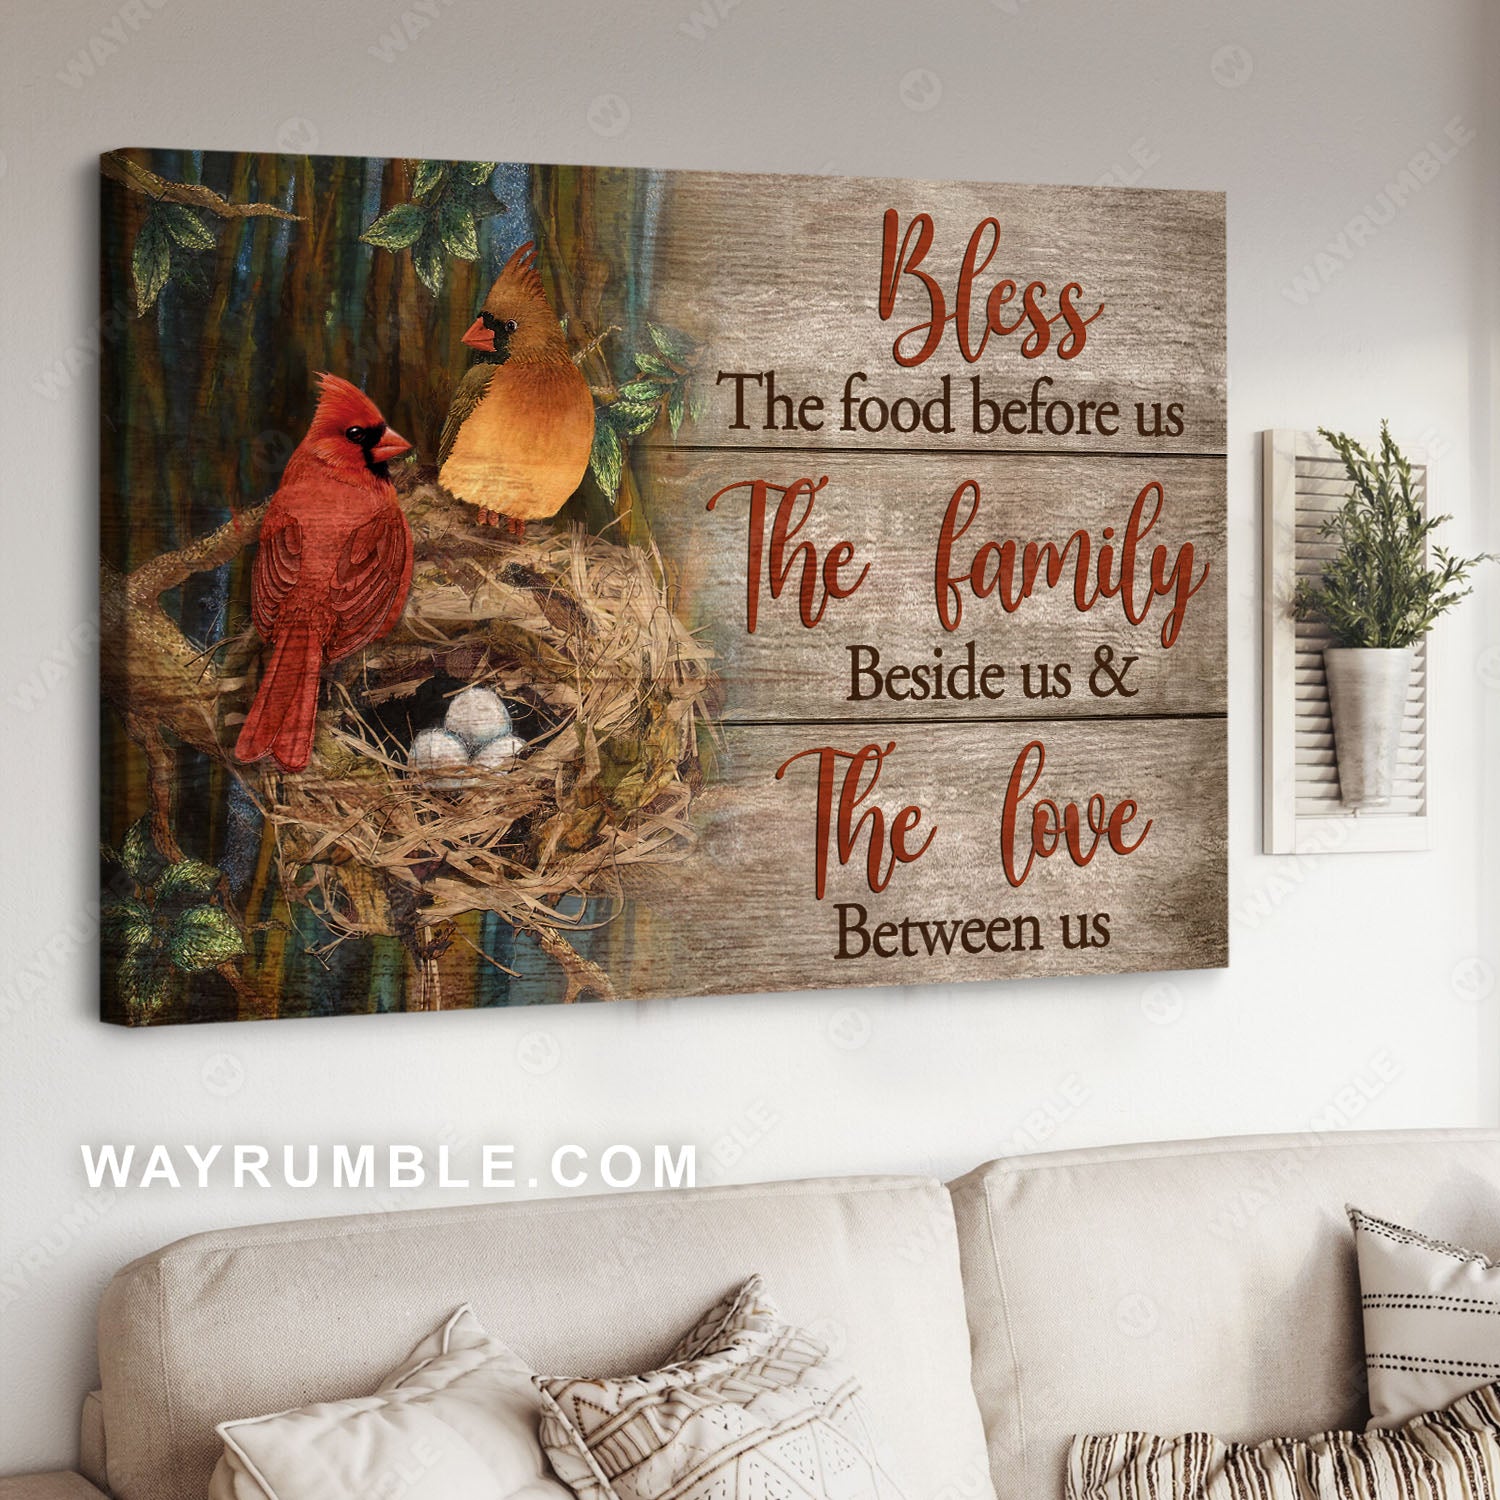 Cardinal couple. Bird nest, In the forest, Bless the food before us - Jesus Landscape Canvas Prints, Christian Wall Art